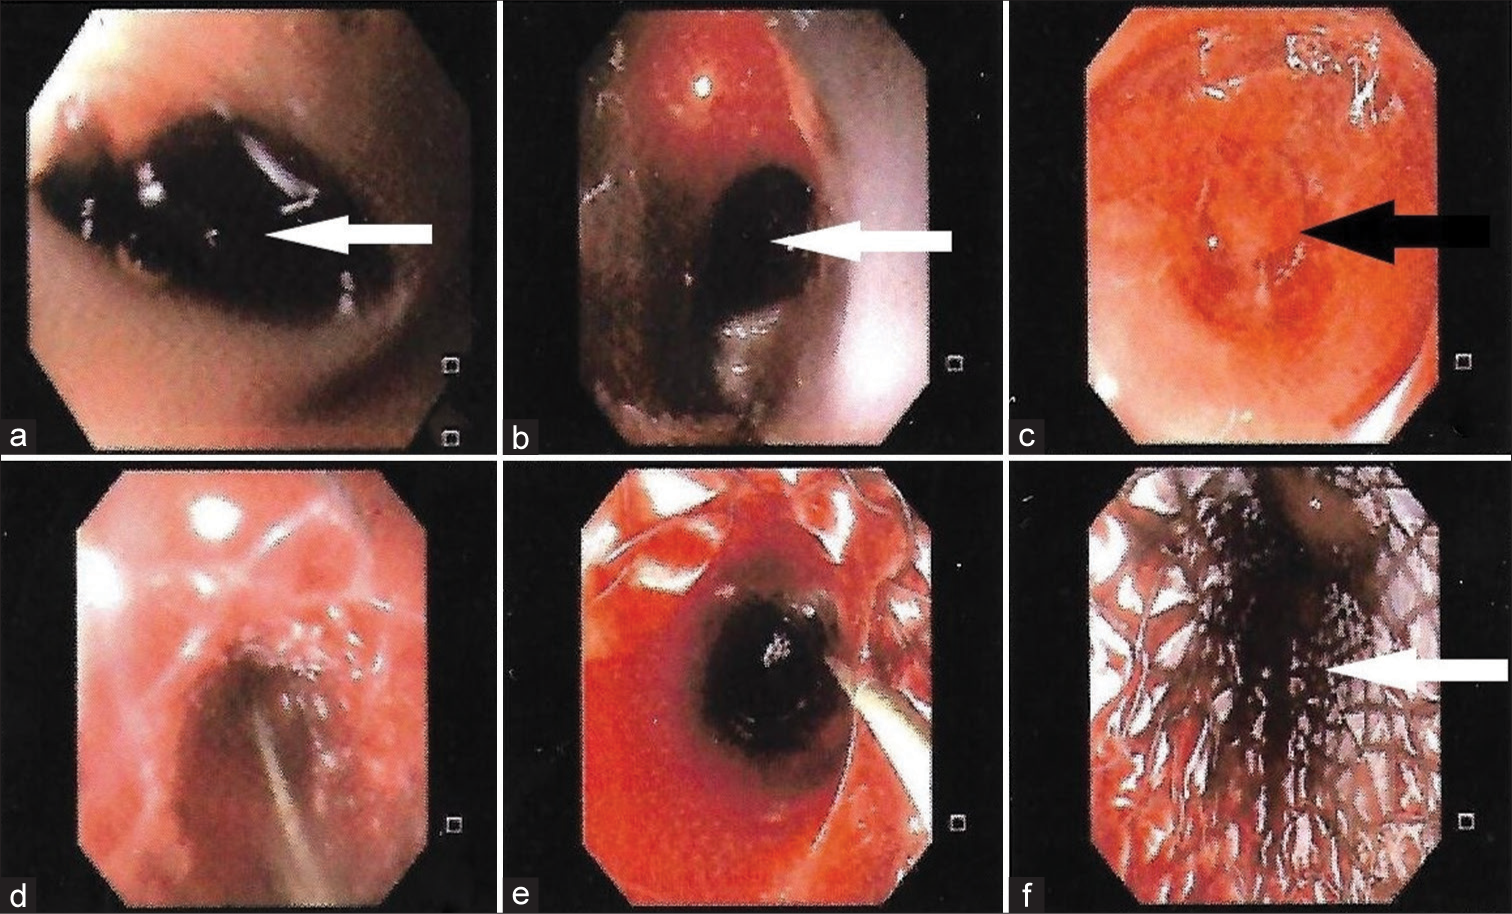 Upper gastrointestinal endoscopy showing (a and b) blood clots in esophagus (white arrows), (c) possible site of tear (black arrow), and (d-f) deployment of covered metal stent in the esophagus (white arrow).